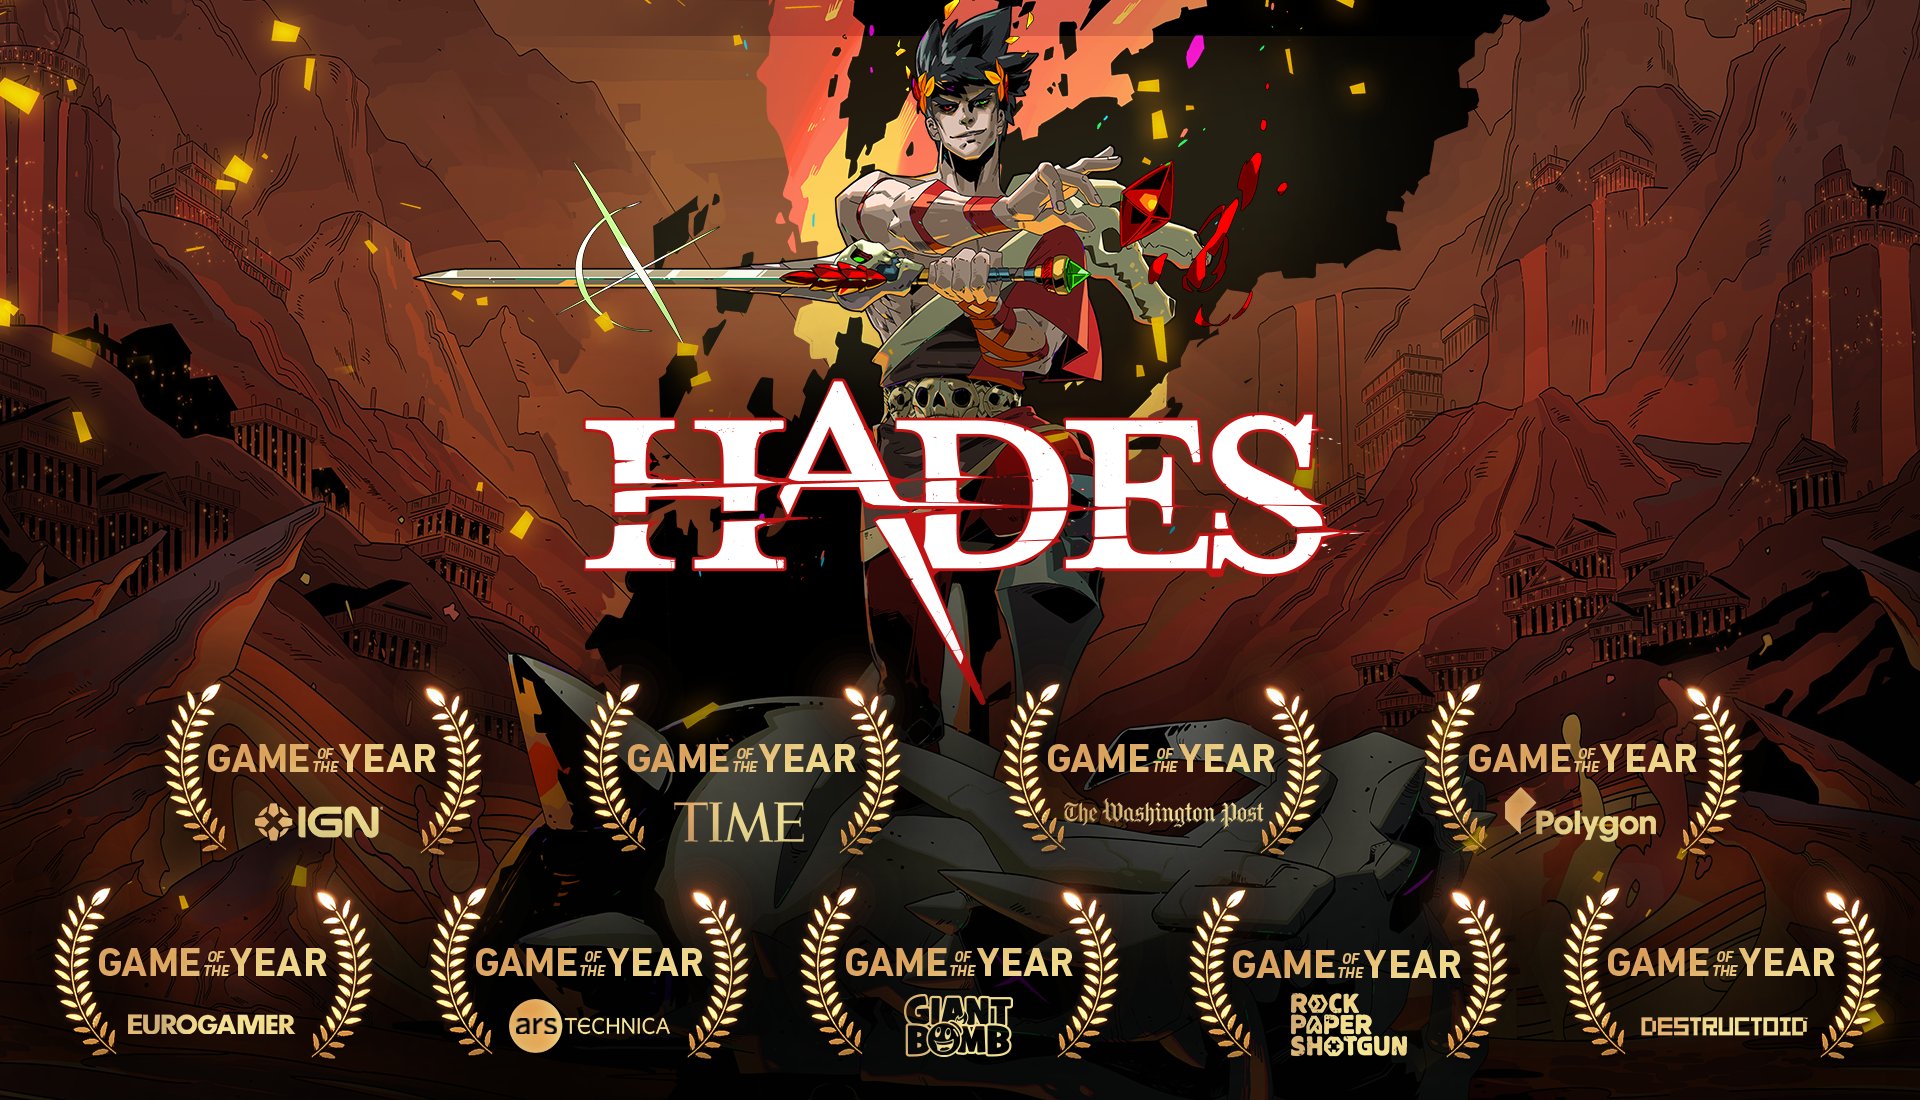 DAY 10] Adding the Top Comment to this image to summon the HADES 2 RELEASE  DATE (Zag Fishing His New Gear has been added) : r/HadesTheGame